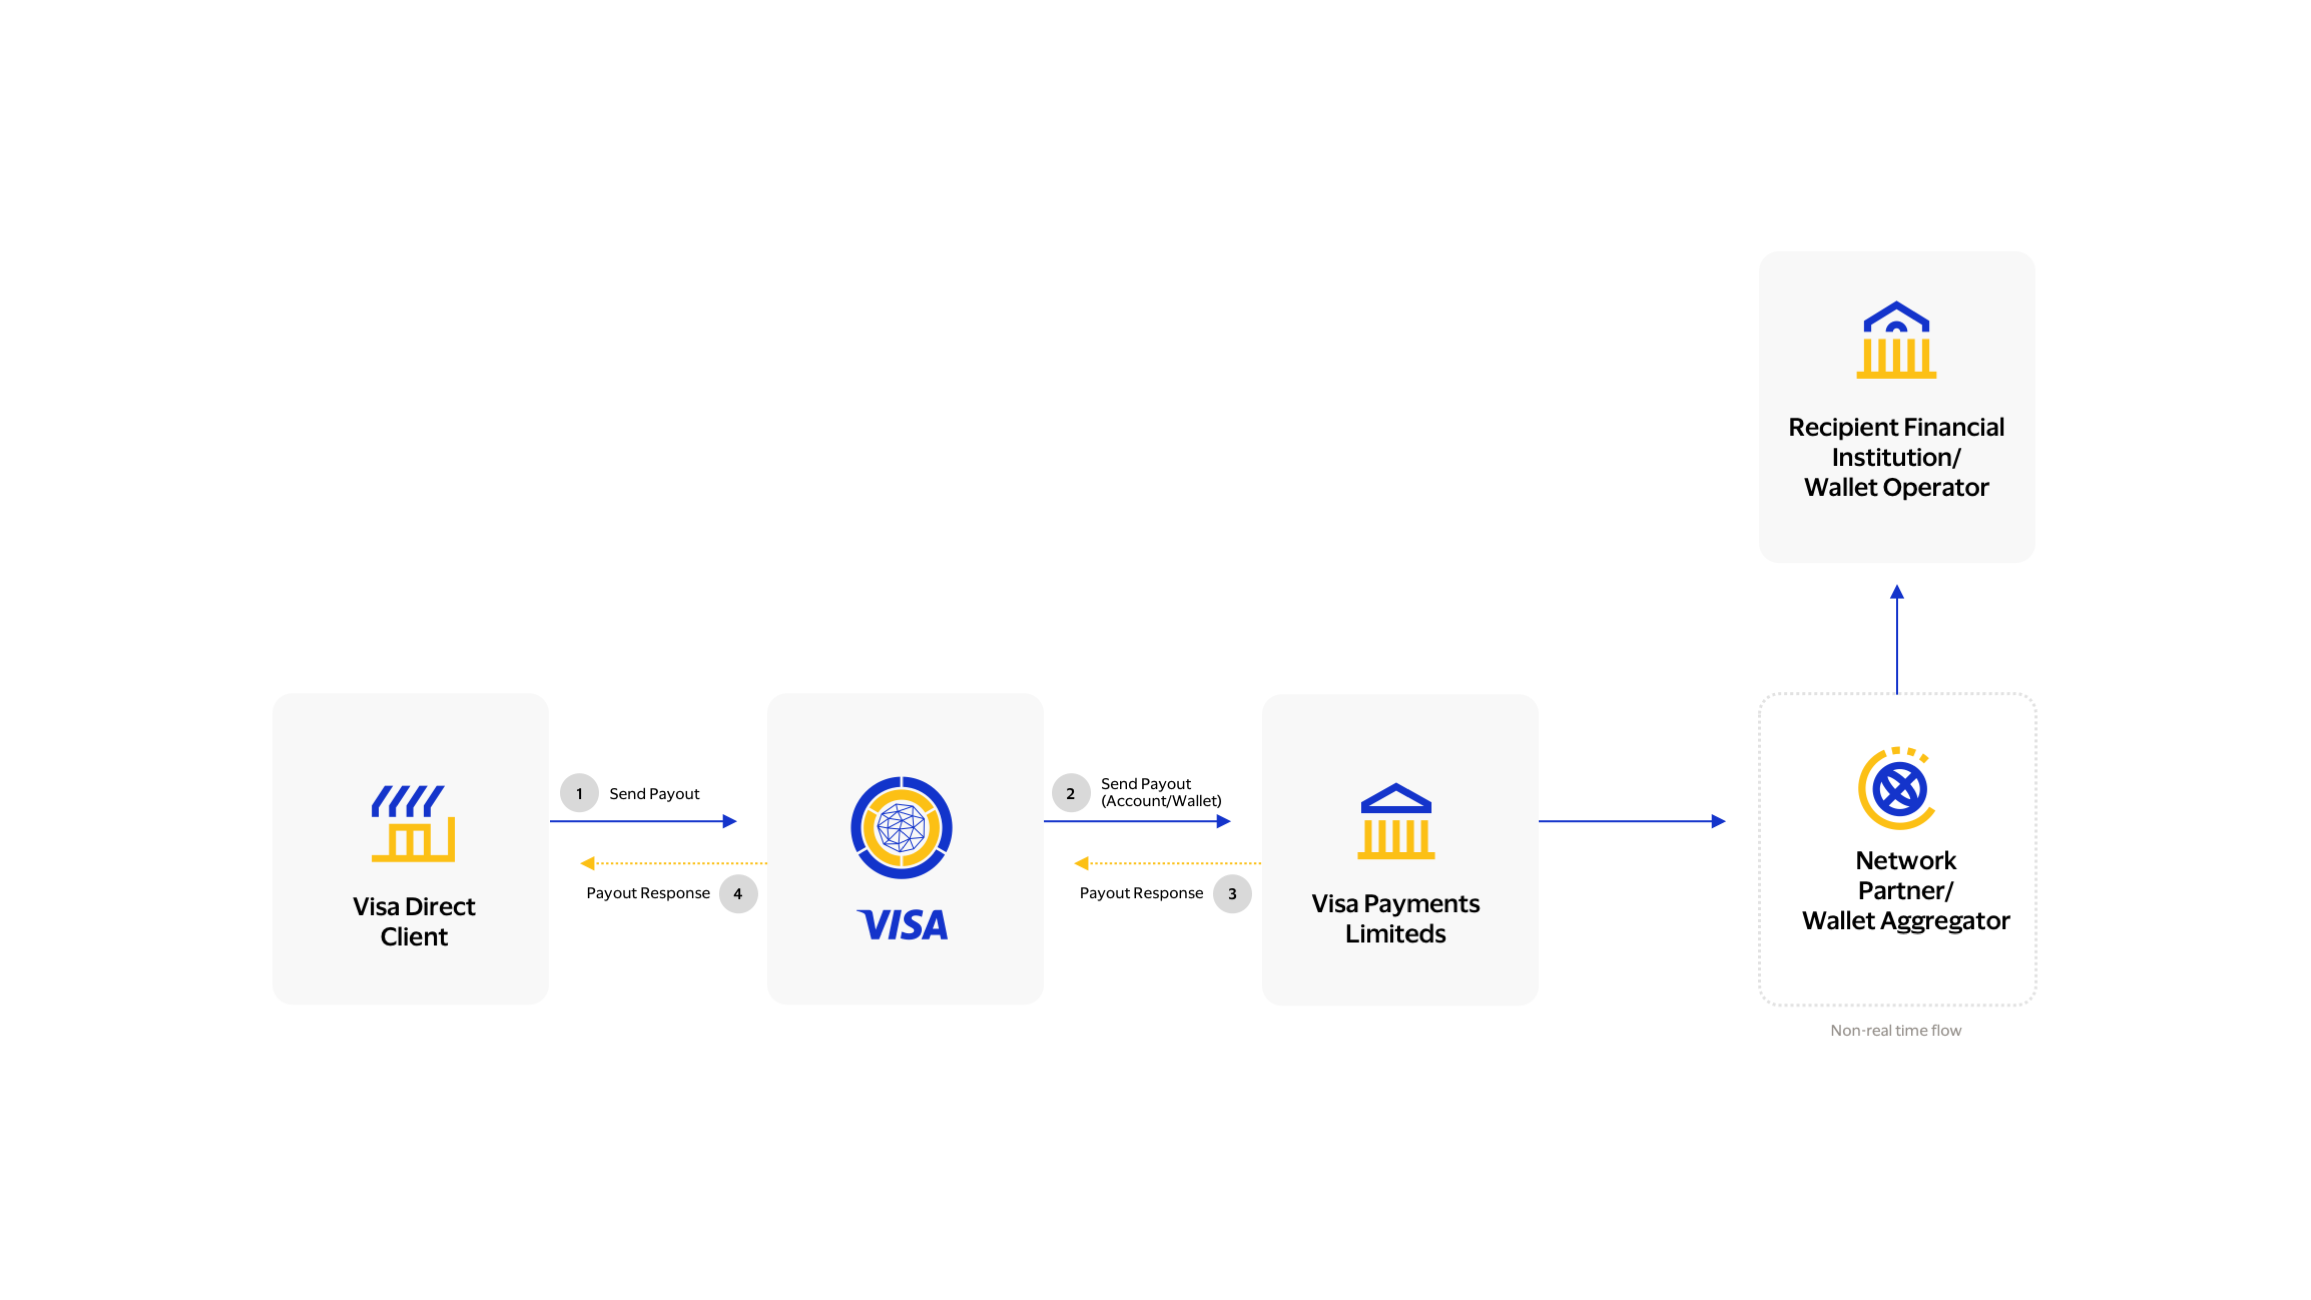 This image explains the transaction flow of Send payout API under Visa Direct Account and Wallet APIs.